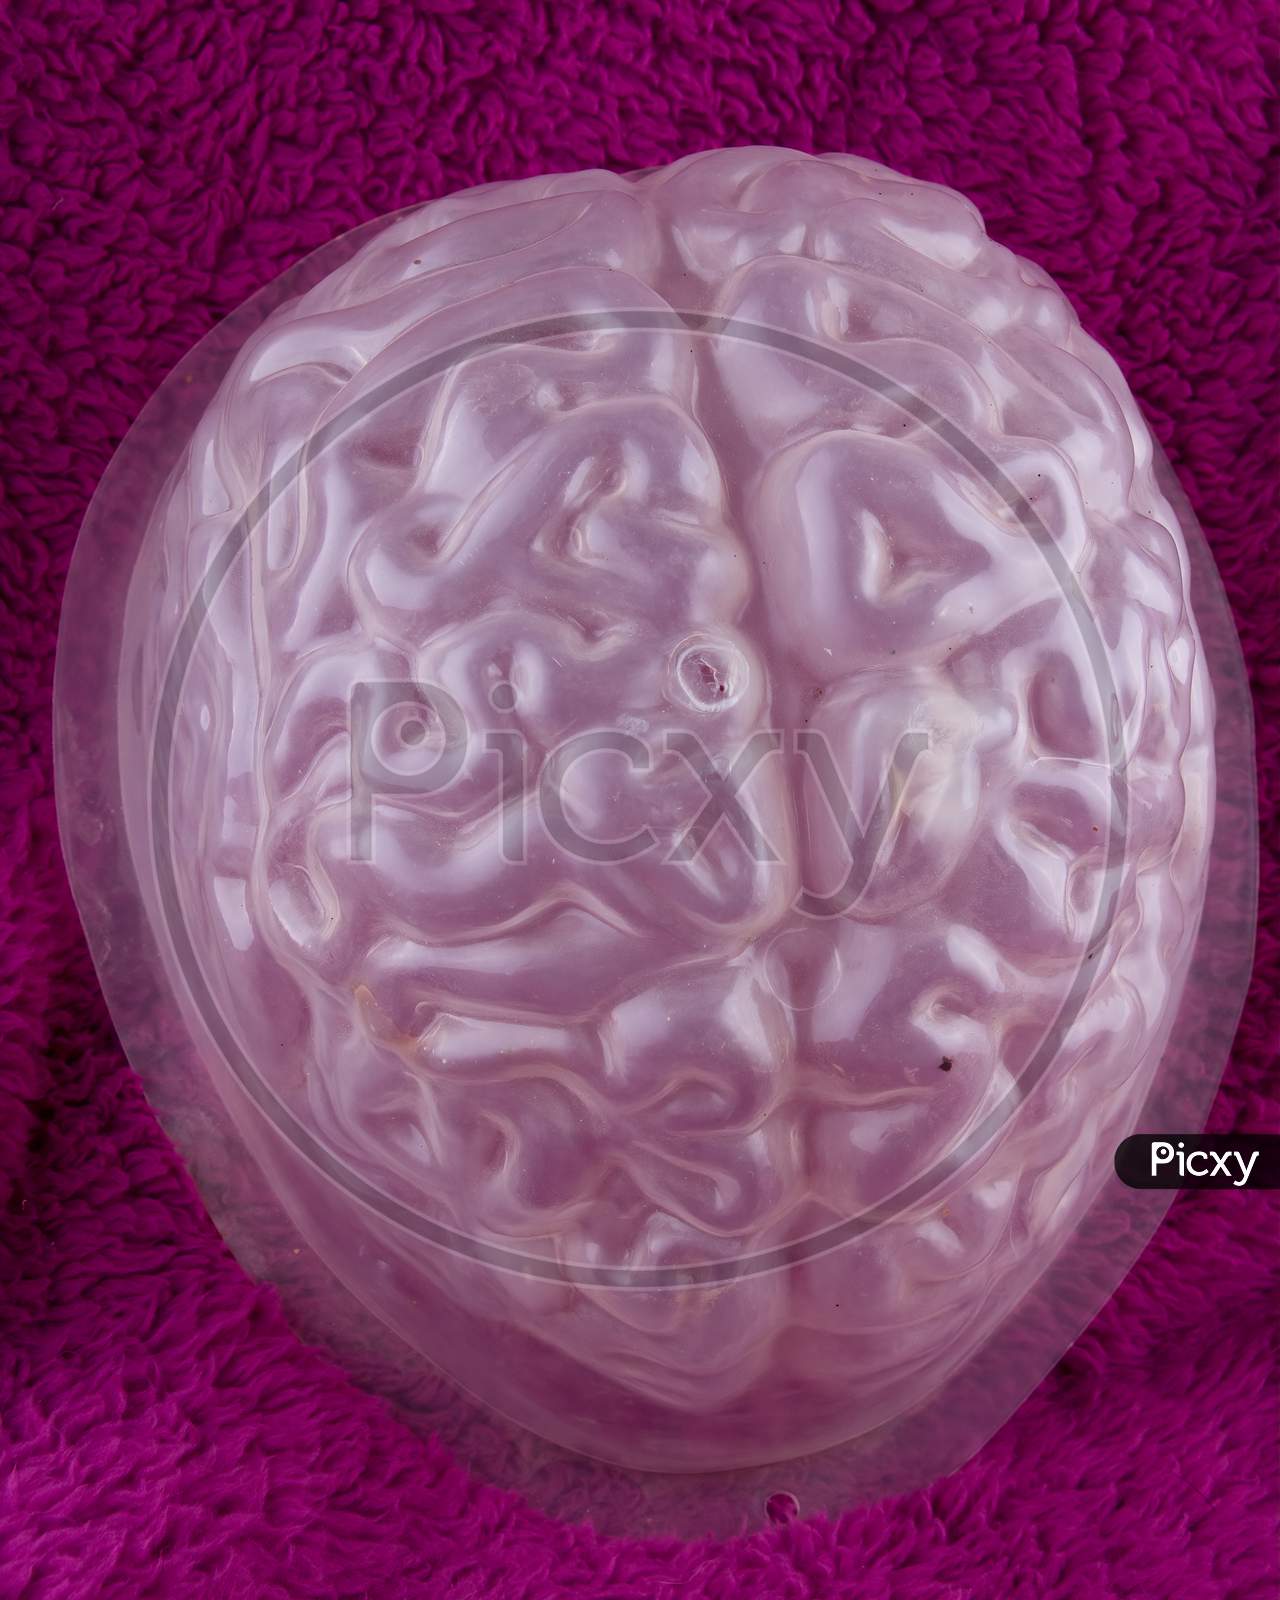 Wrinkled Faux Brain On Fluffy Purple Background. Concept For Halloween Shenanignans.